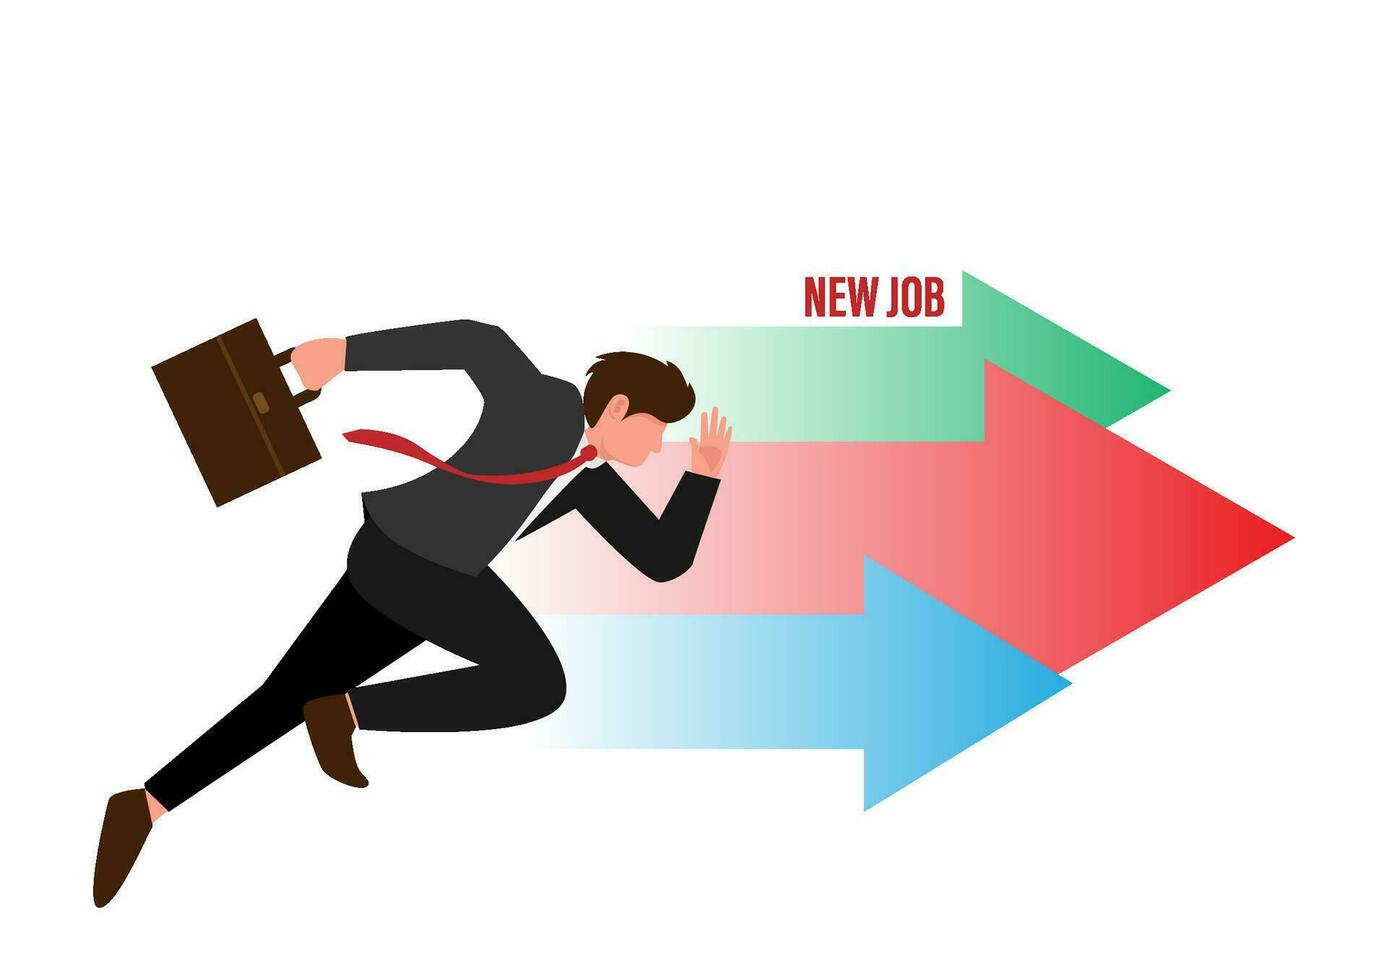 Change to new job, career or opportunity, new challenge to success, improvement or advancement, recruitment or employment concept, businessman employee carrying stuffs changing to new job vector